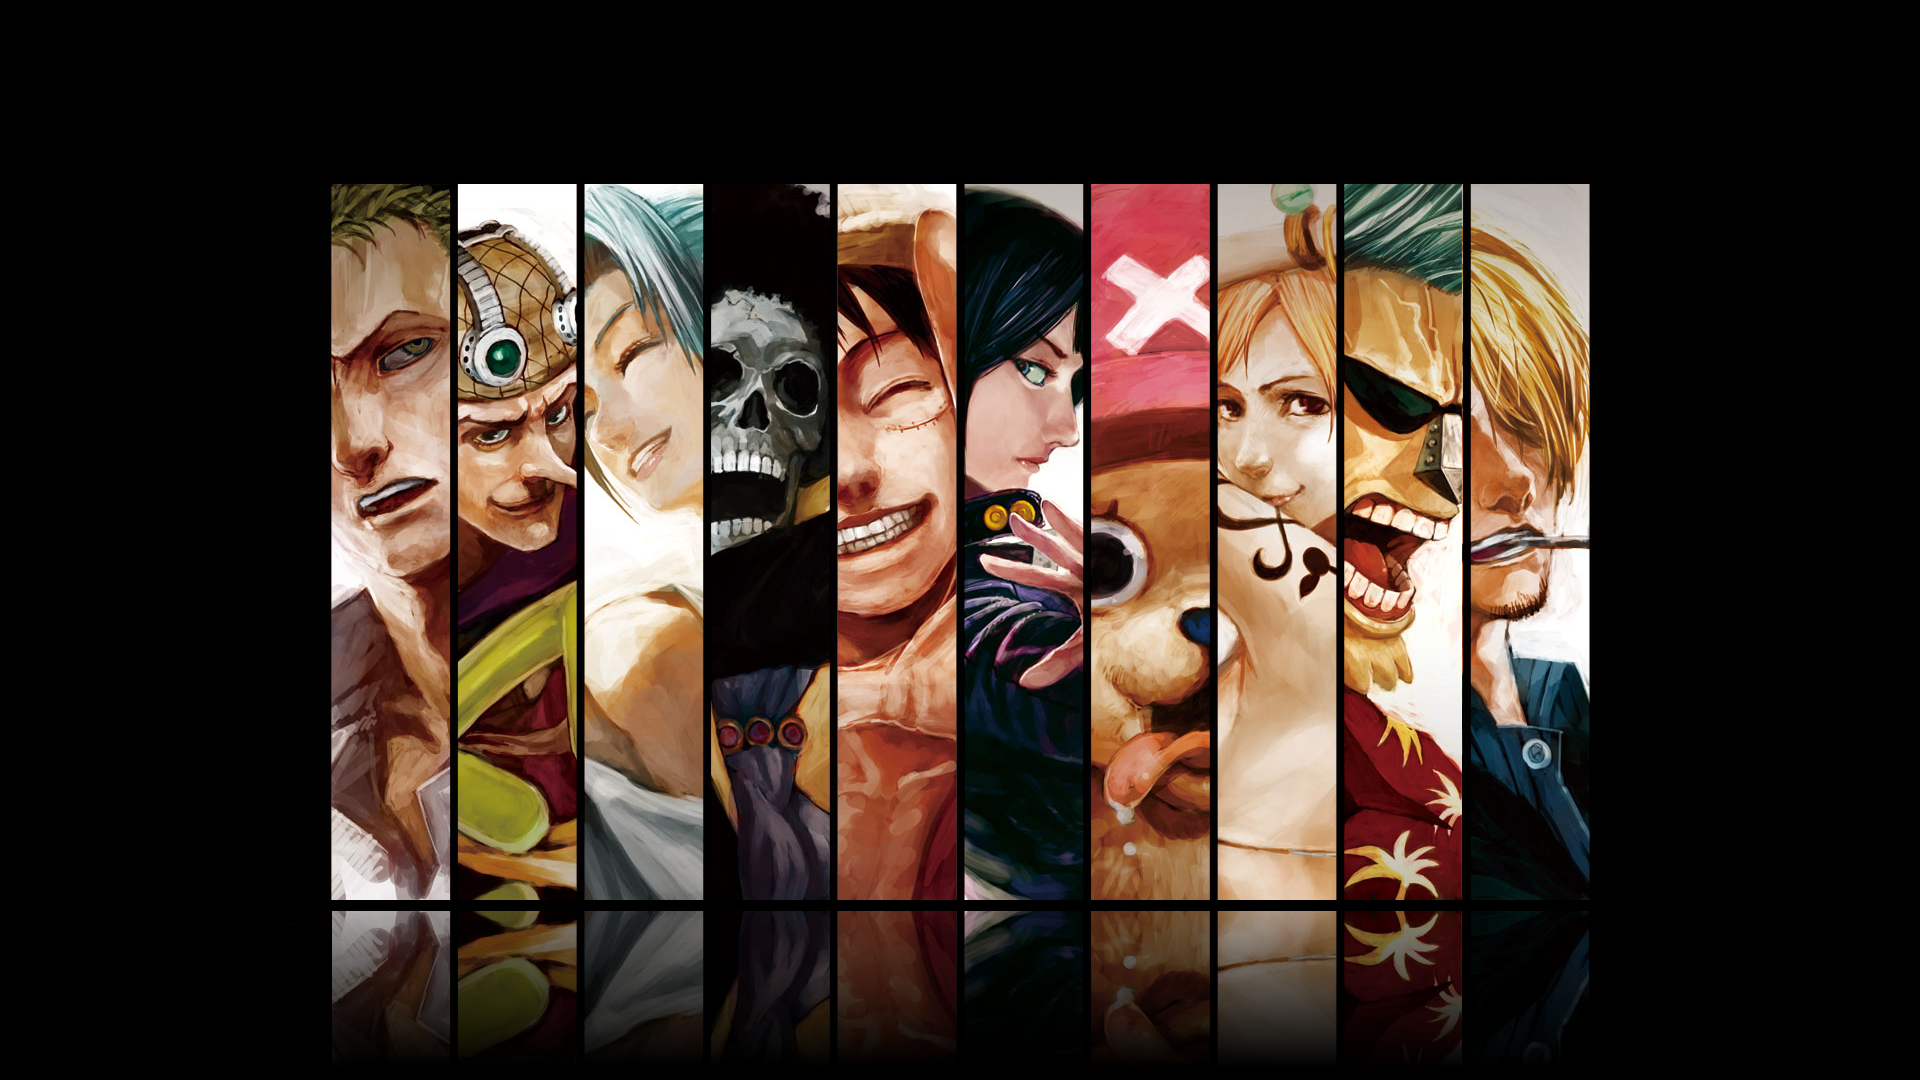 One Piece Wallpaper Ios 7 | One Piece HD Wallpapers